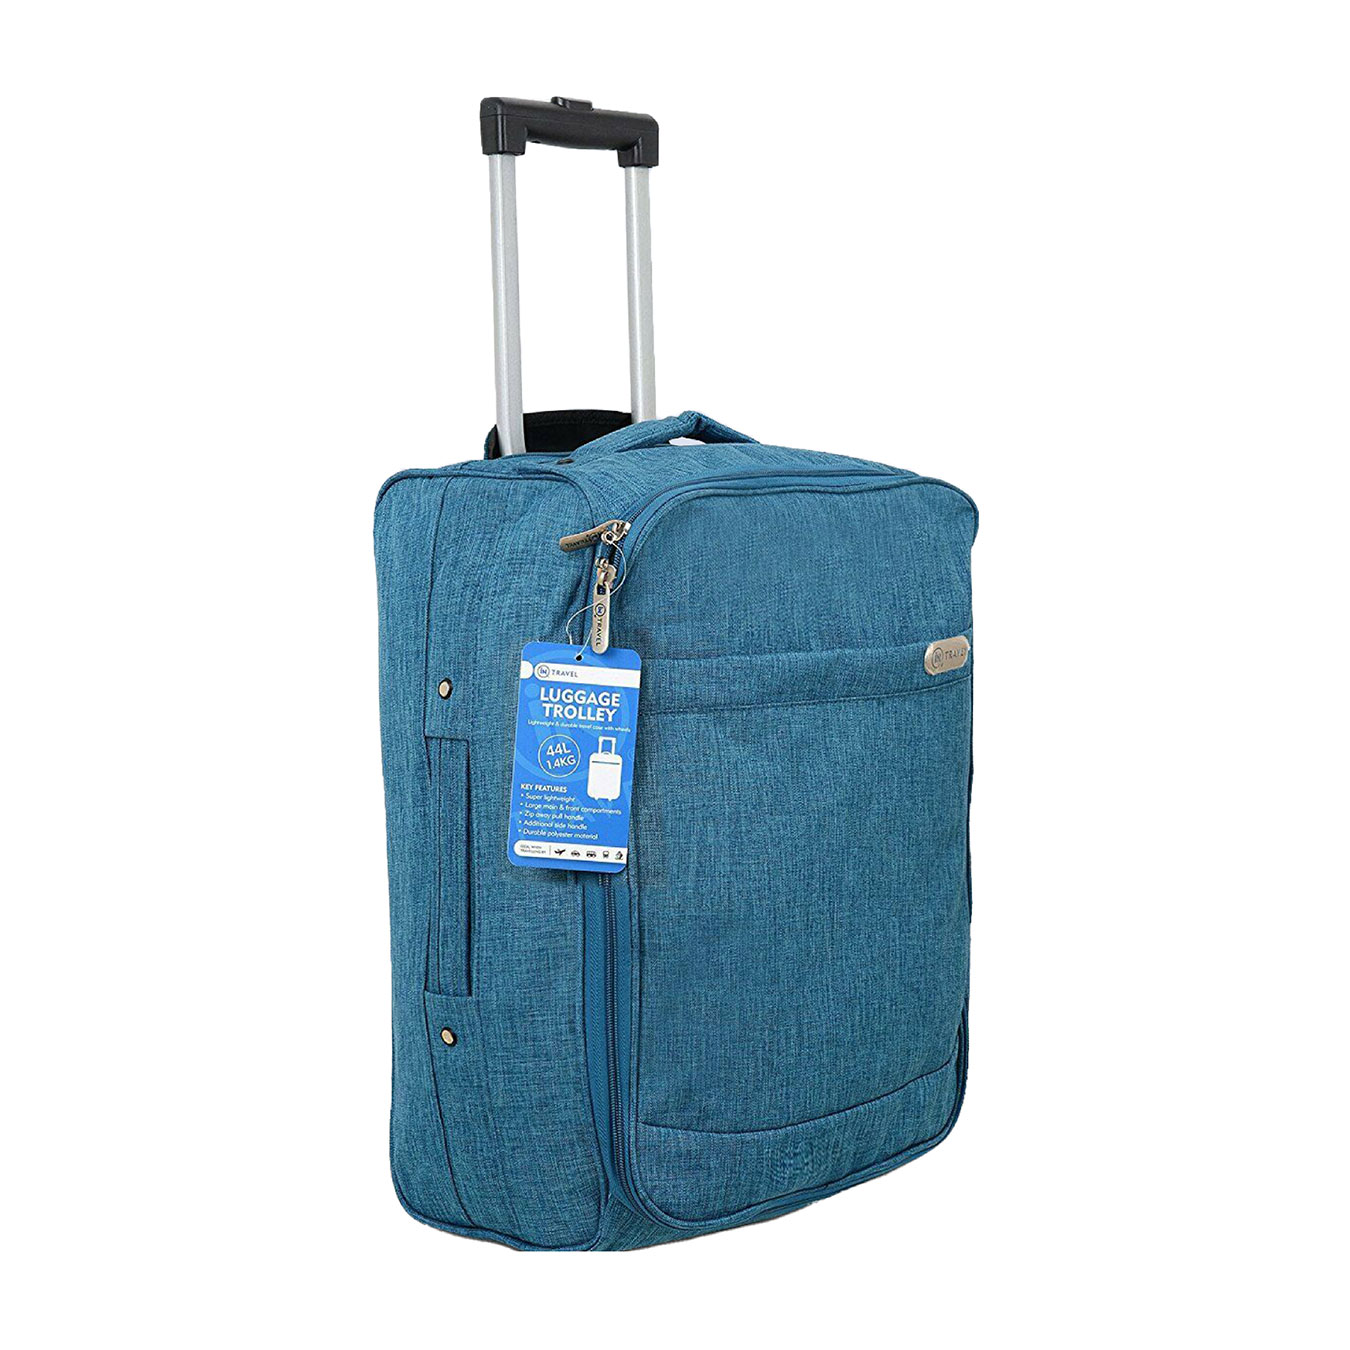 An image of iN Travel Hand Luggage - 44L Flight Bag (Blue)